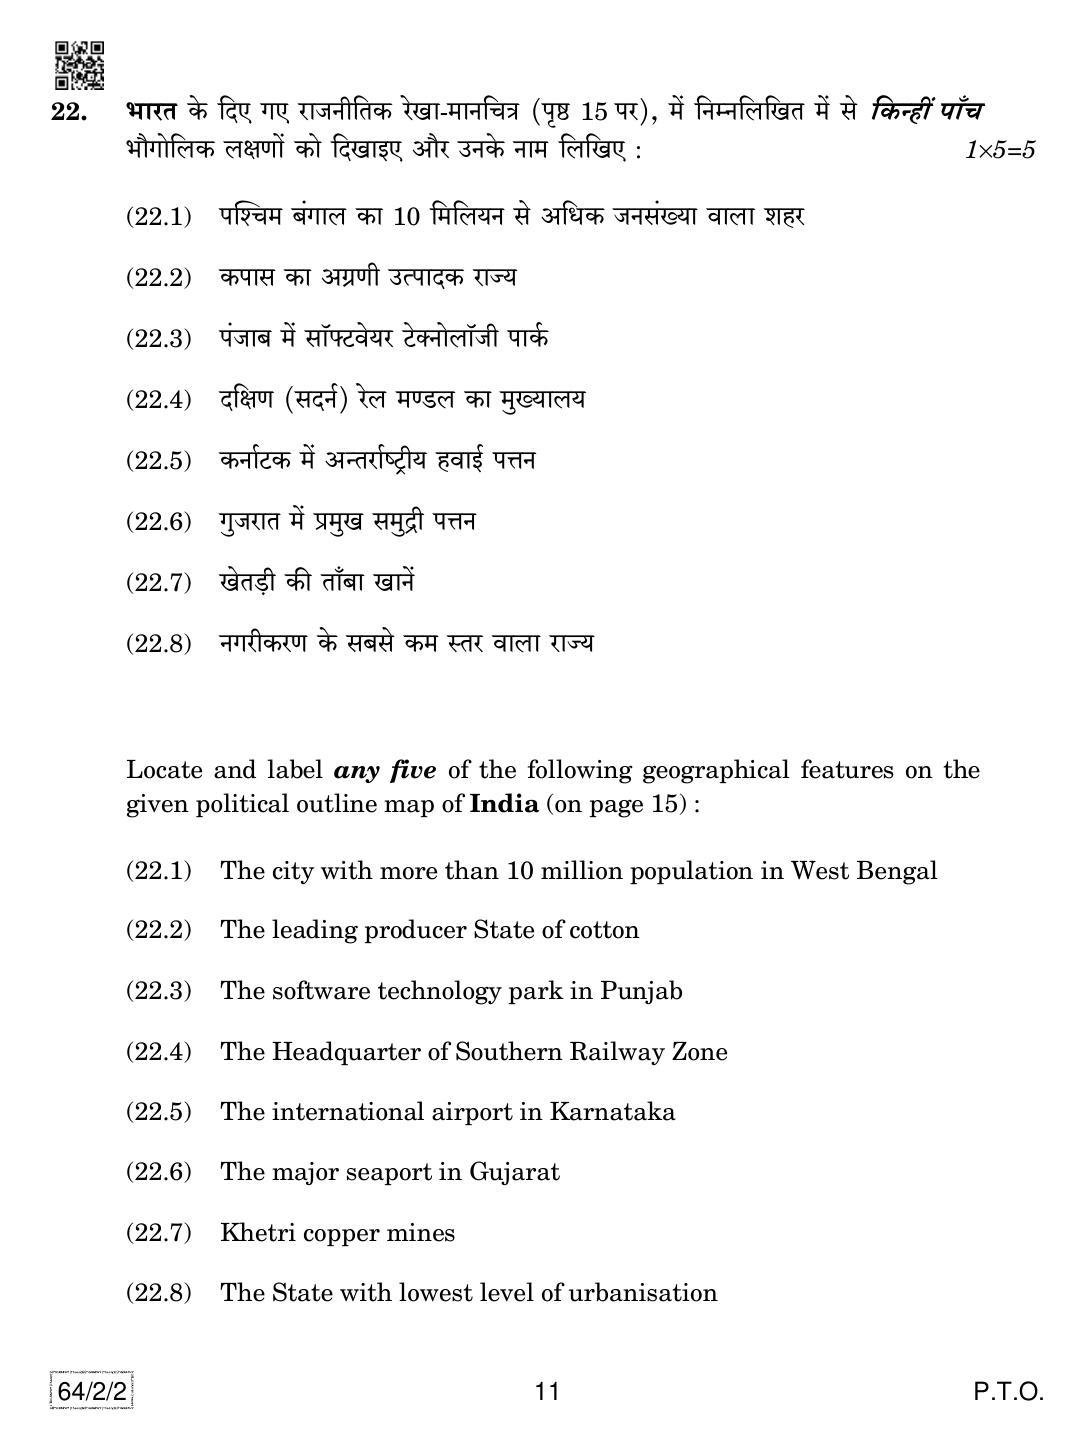 CBSE Class 12 64-2-2 Geography 2019 Question Paper - Page 11